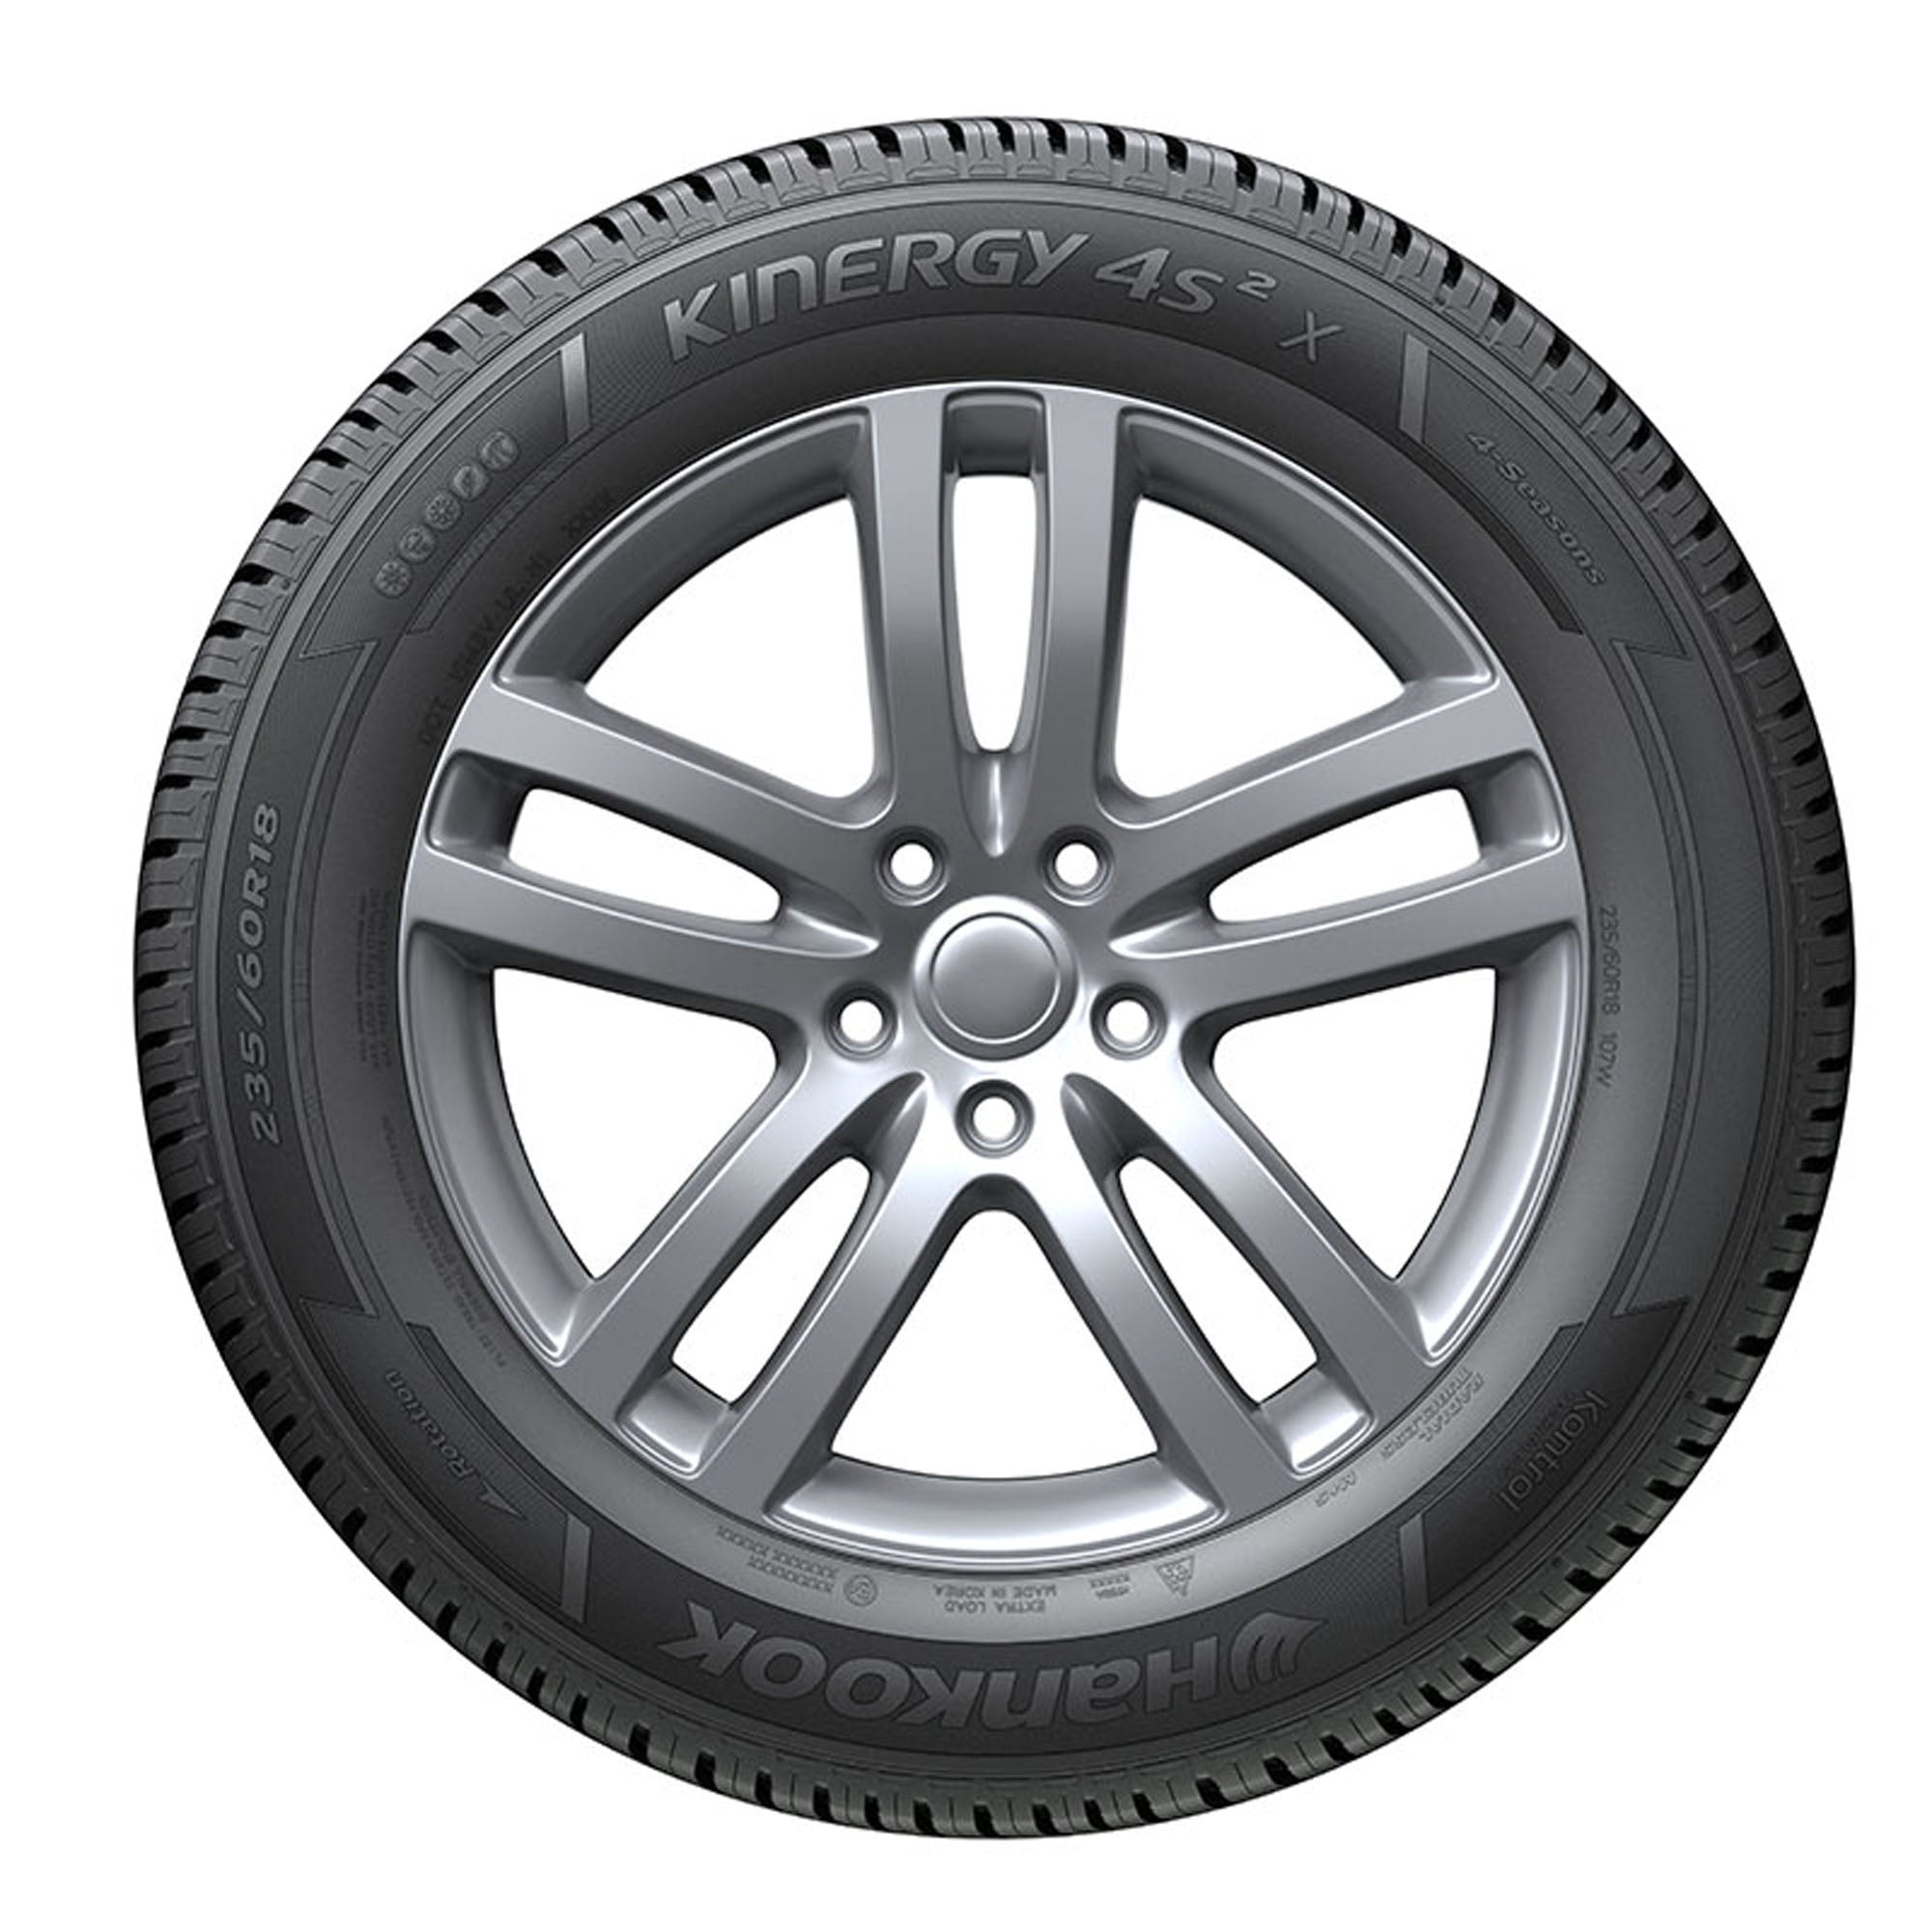 Hankook Kinergy 4S2 X (H750A) 99H Tire 225/60R17 All SUV/Crossover Weather